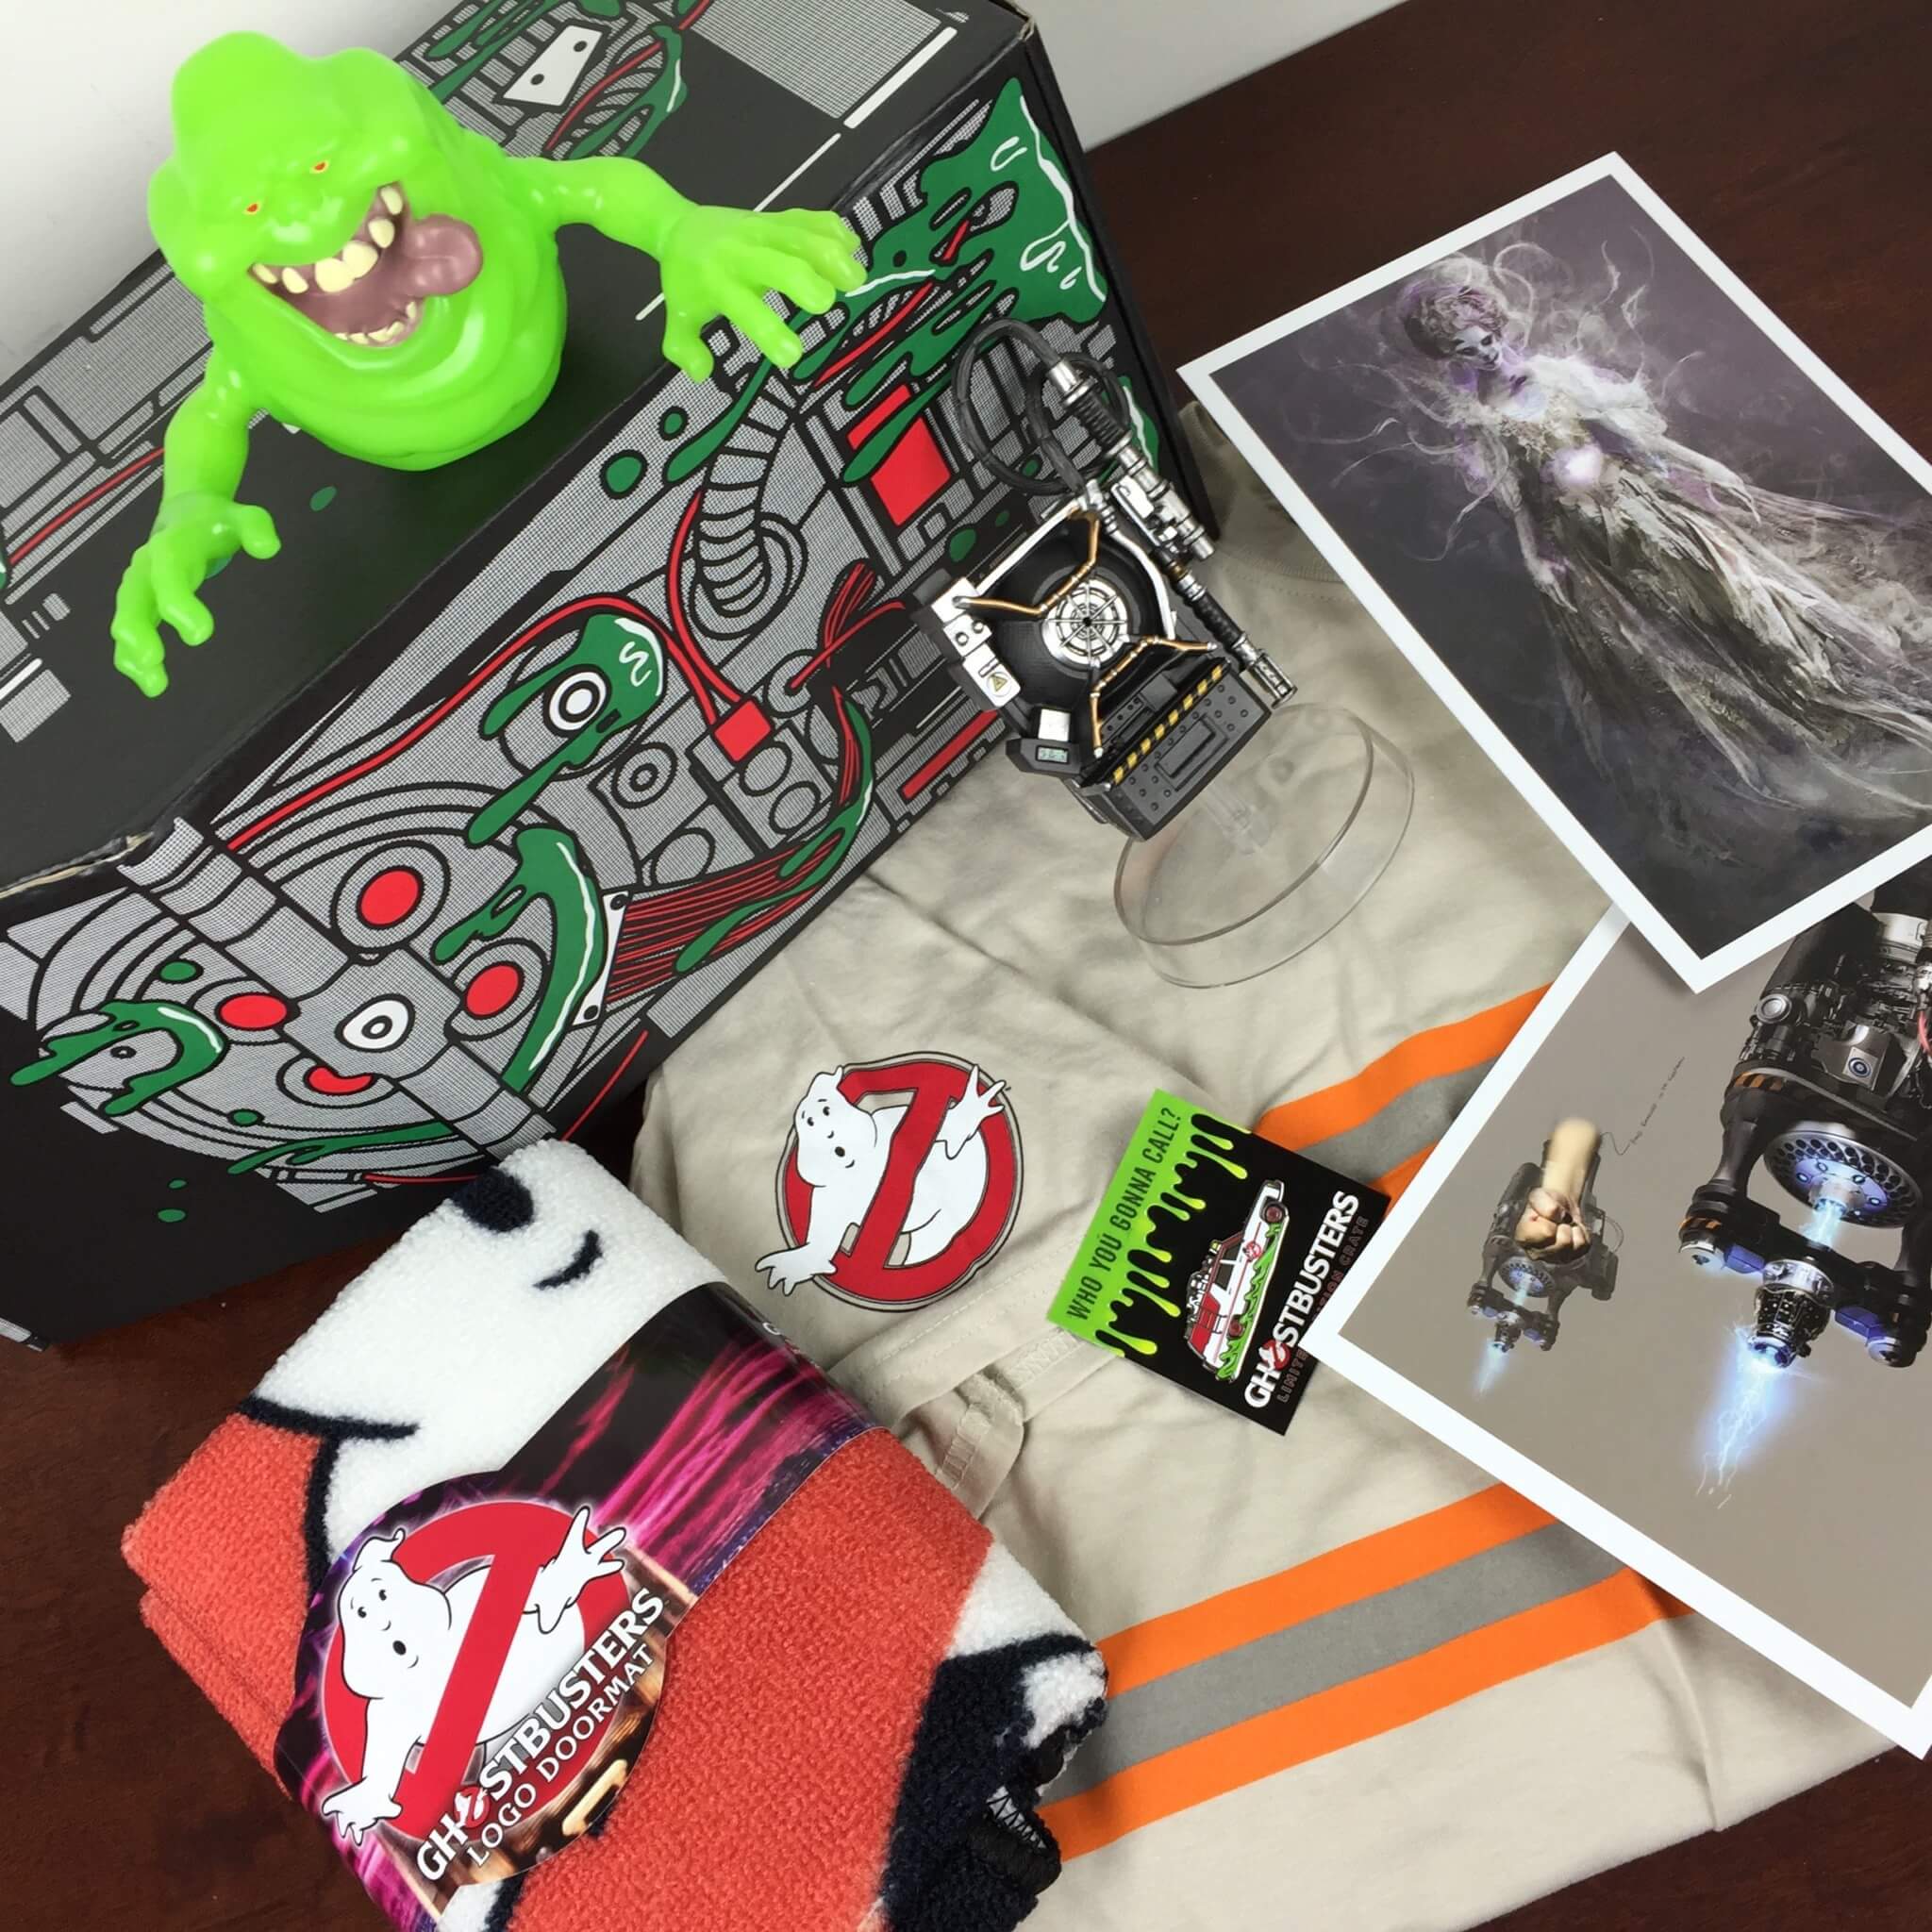 https://hellosubscription.com/wp-content/uploads/2016/07/Loot-Crate-GHOSTBUSTERS-Limited-Edition-Box-July-2016-review.jpg?quality=90&strip=all